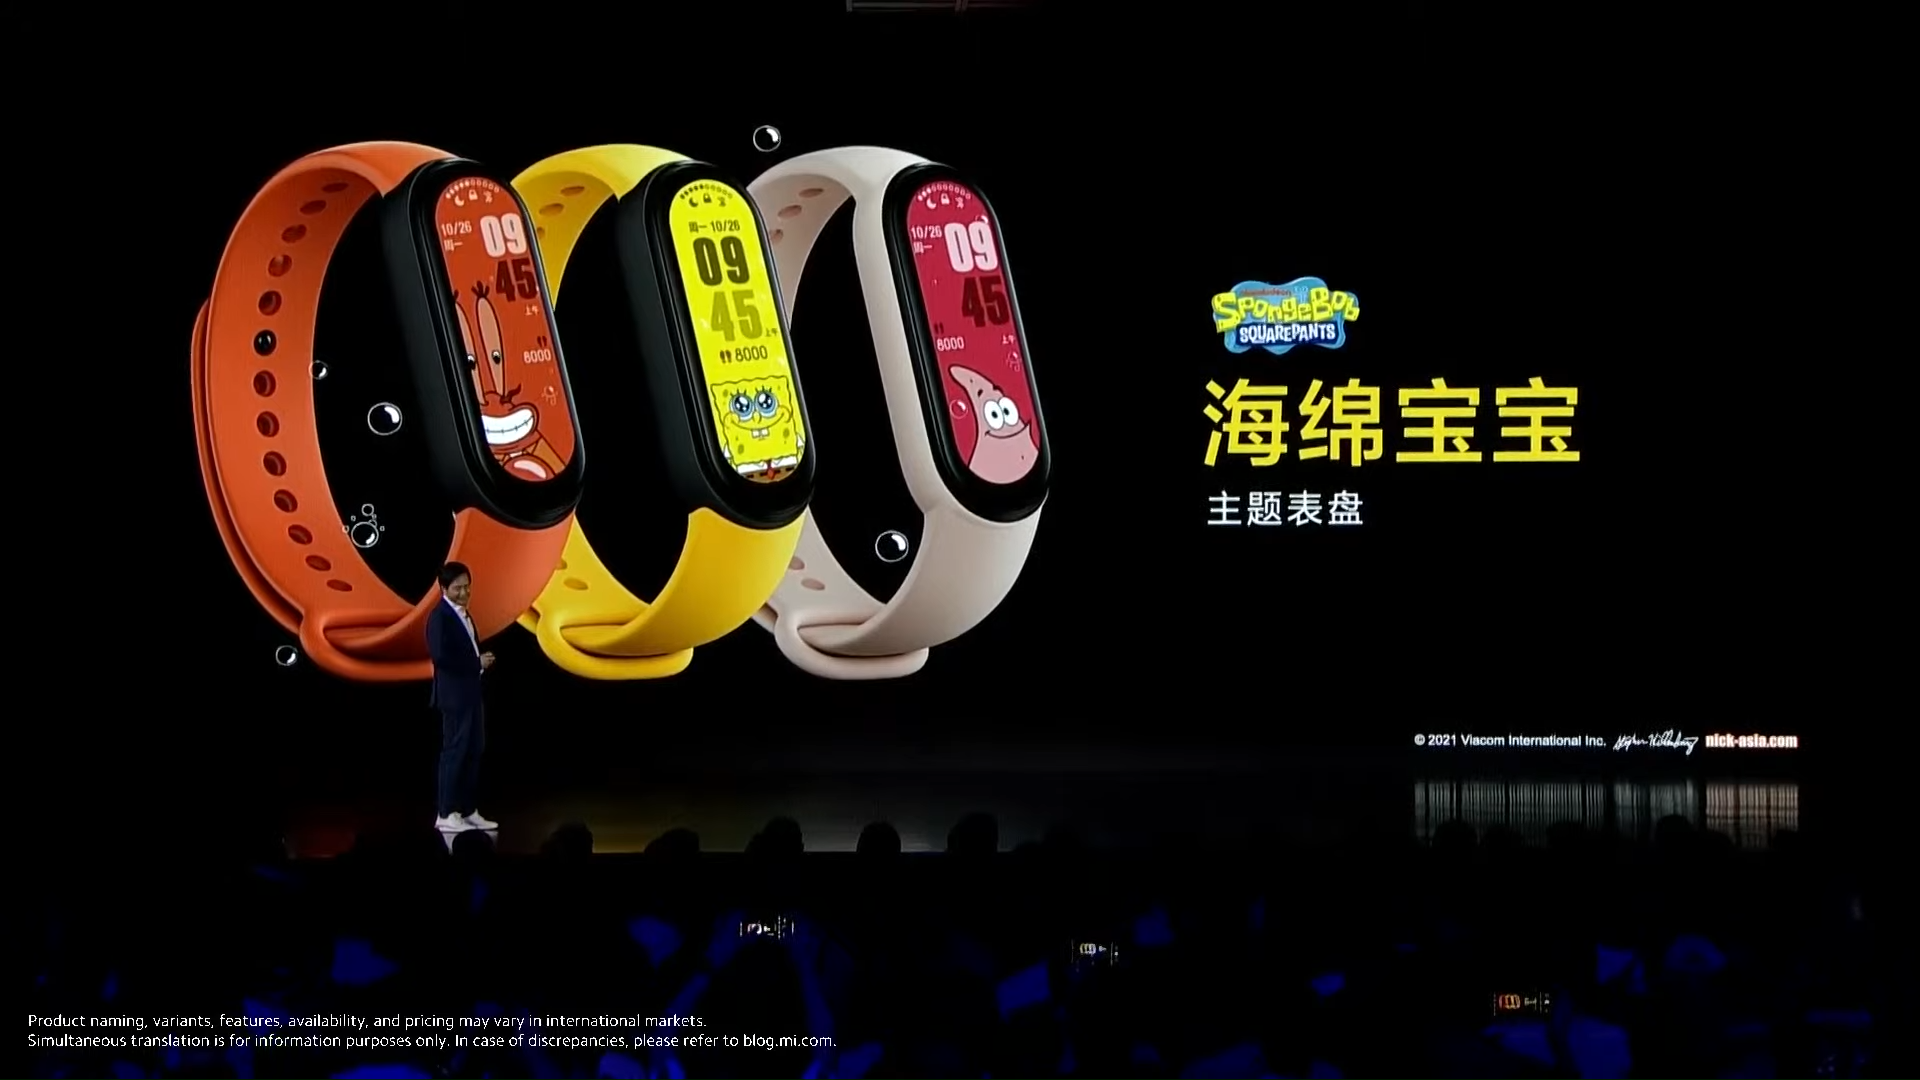 Xiaomi Mi Band 6 with an AMOLED display and NFC launched for $35 